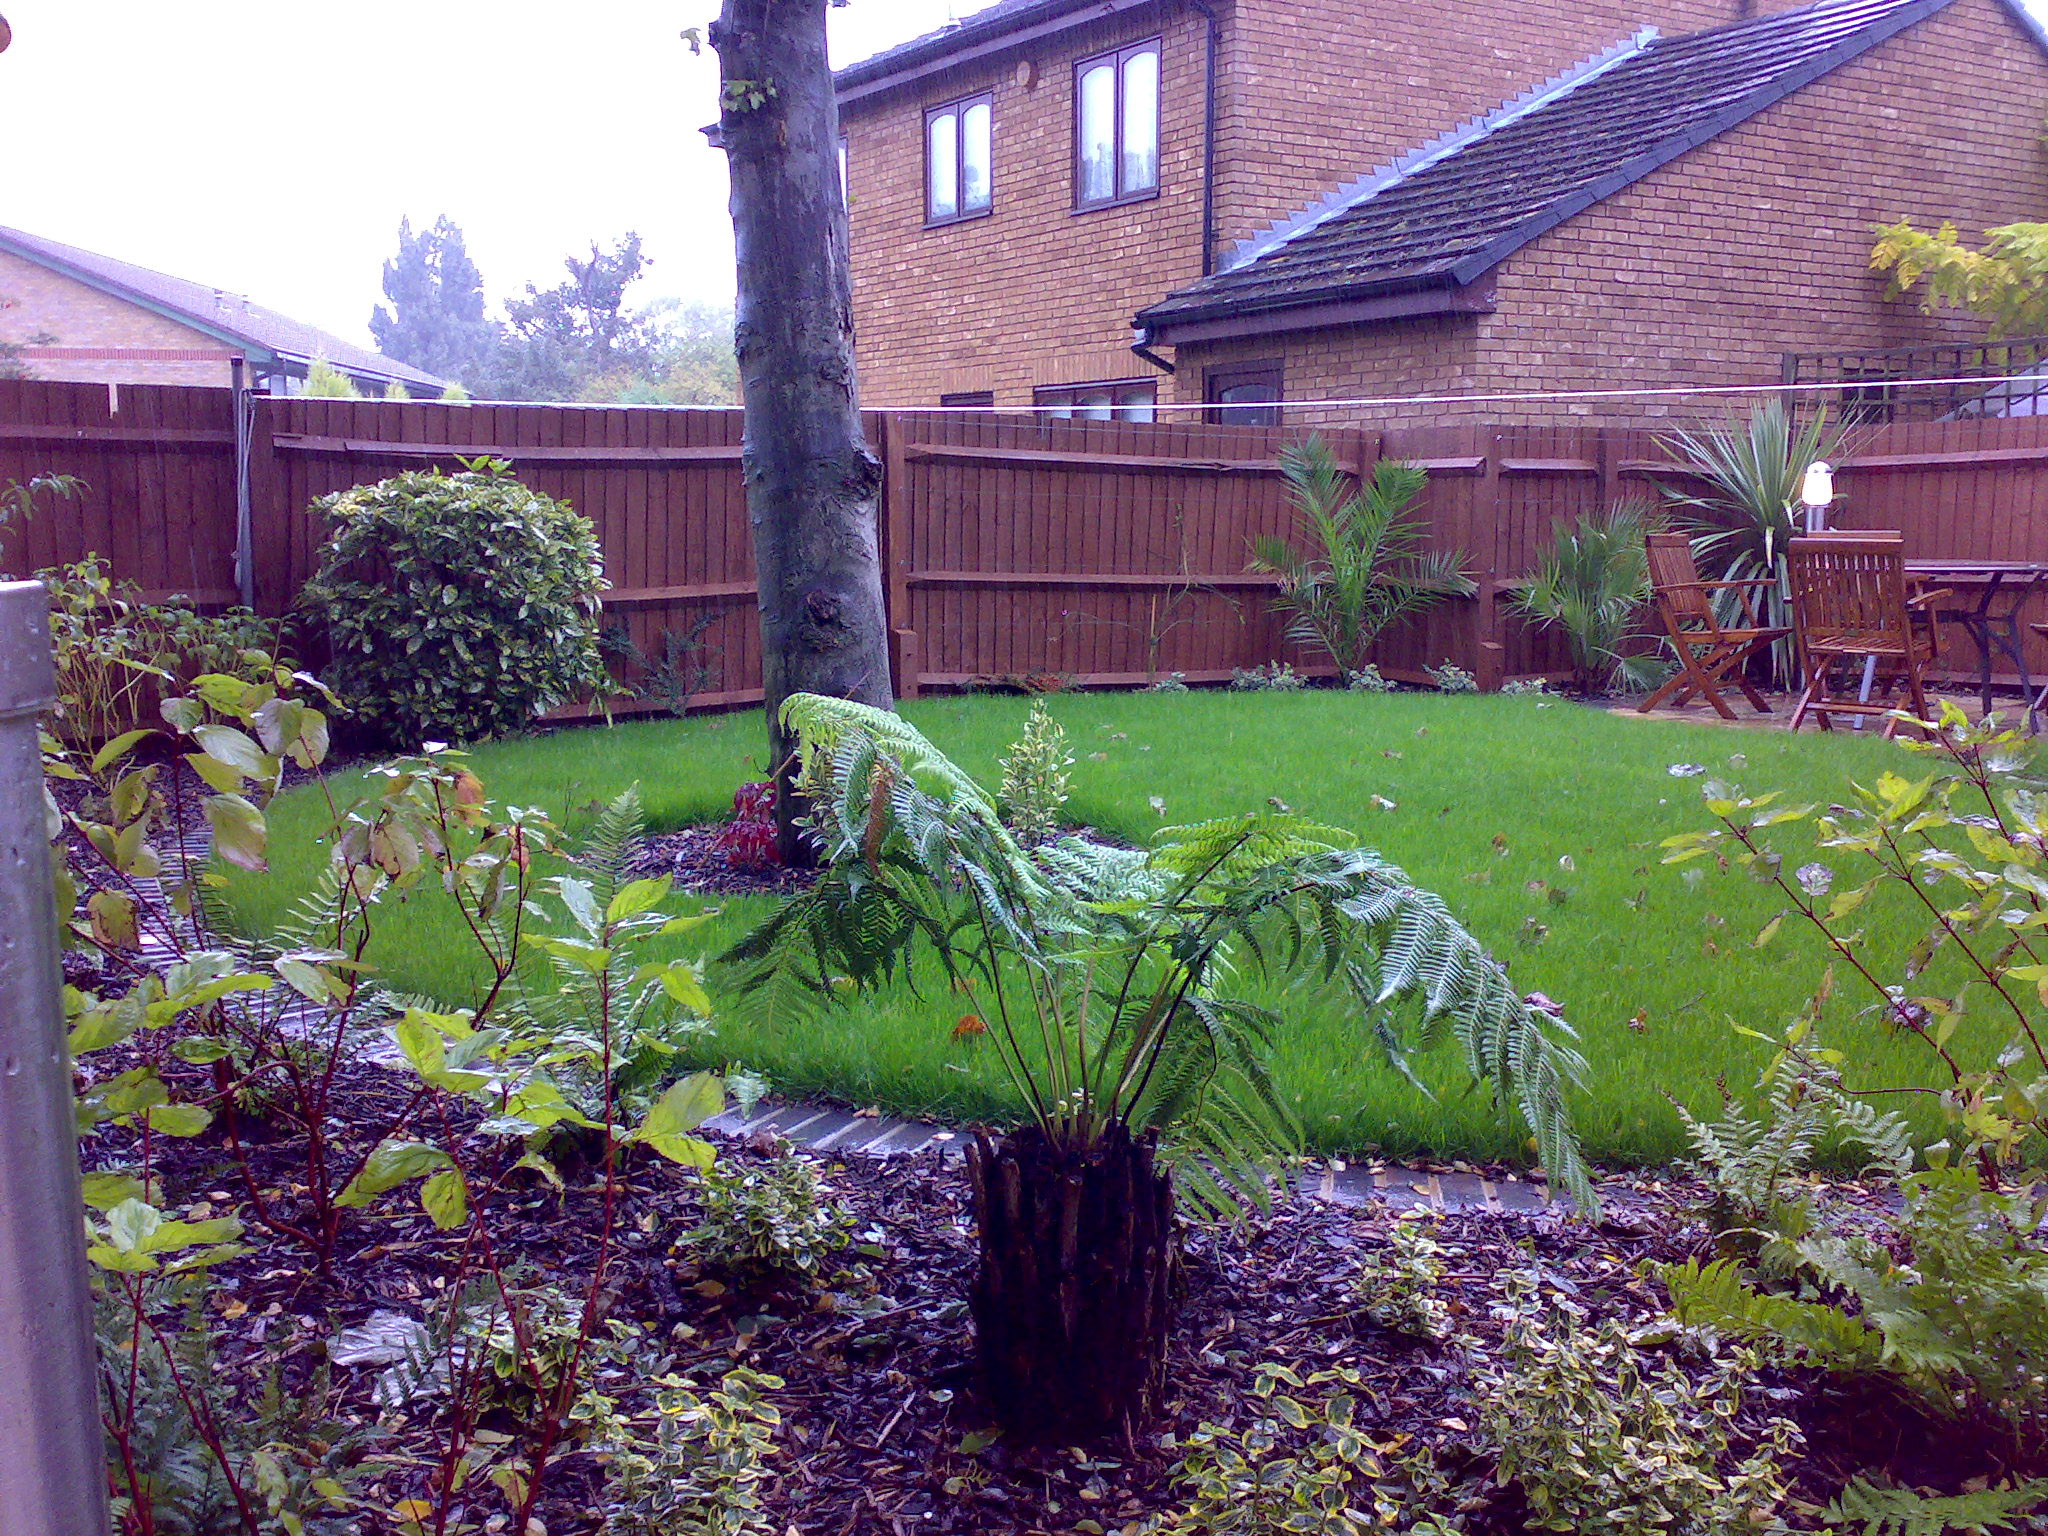 View into the garden looking at the planting and circular lawn with a tree fern and shrubs in the foreground